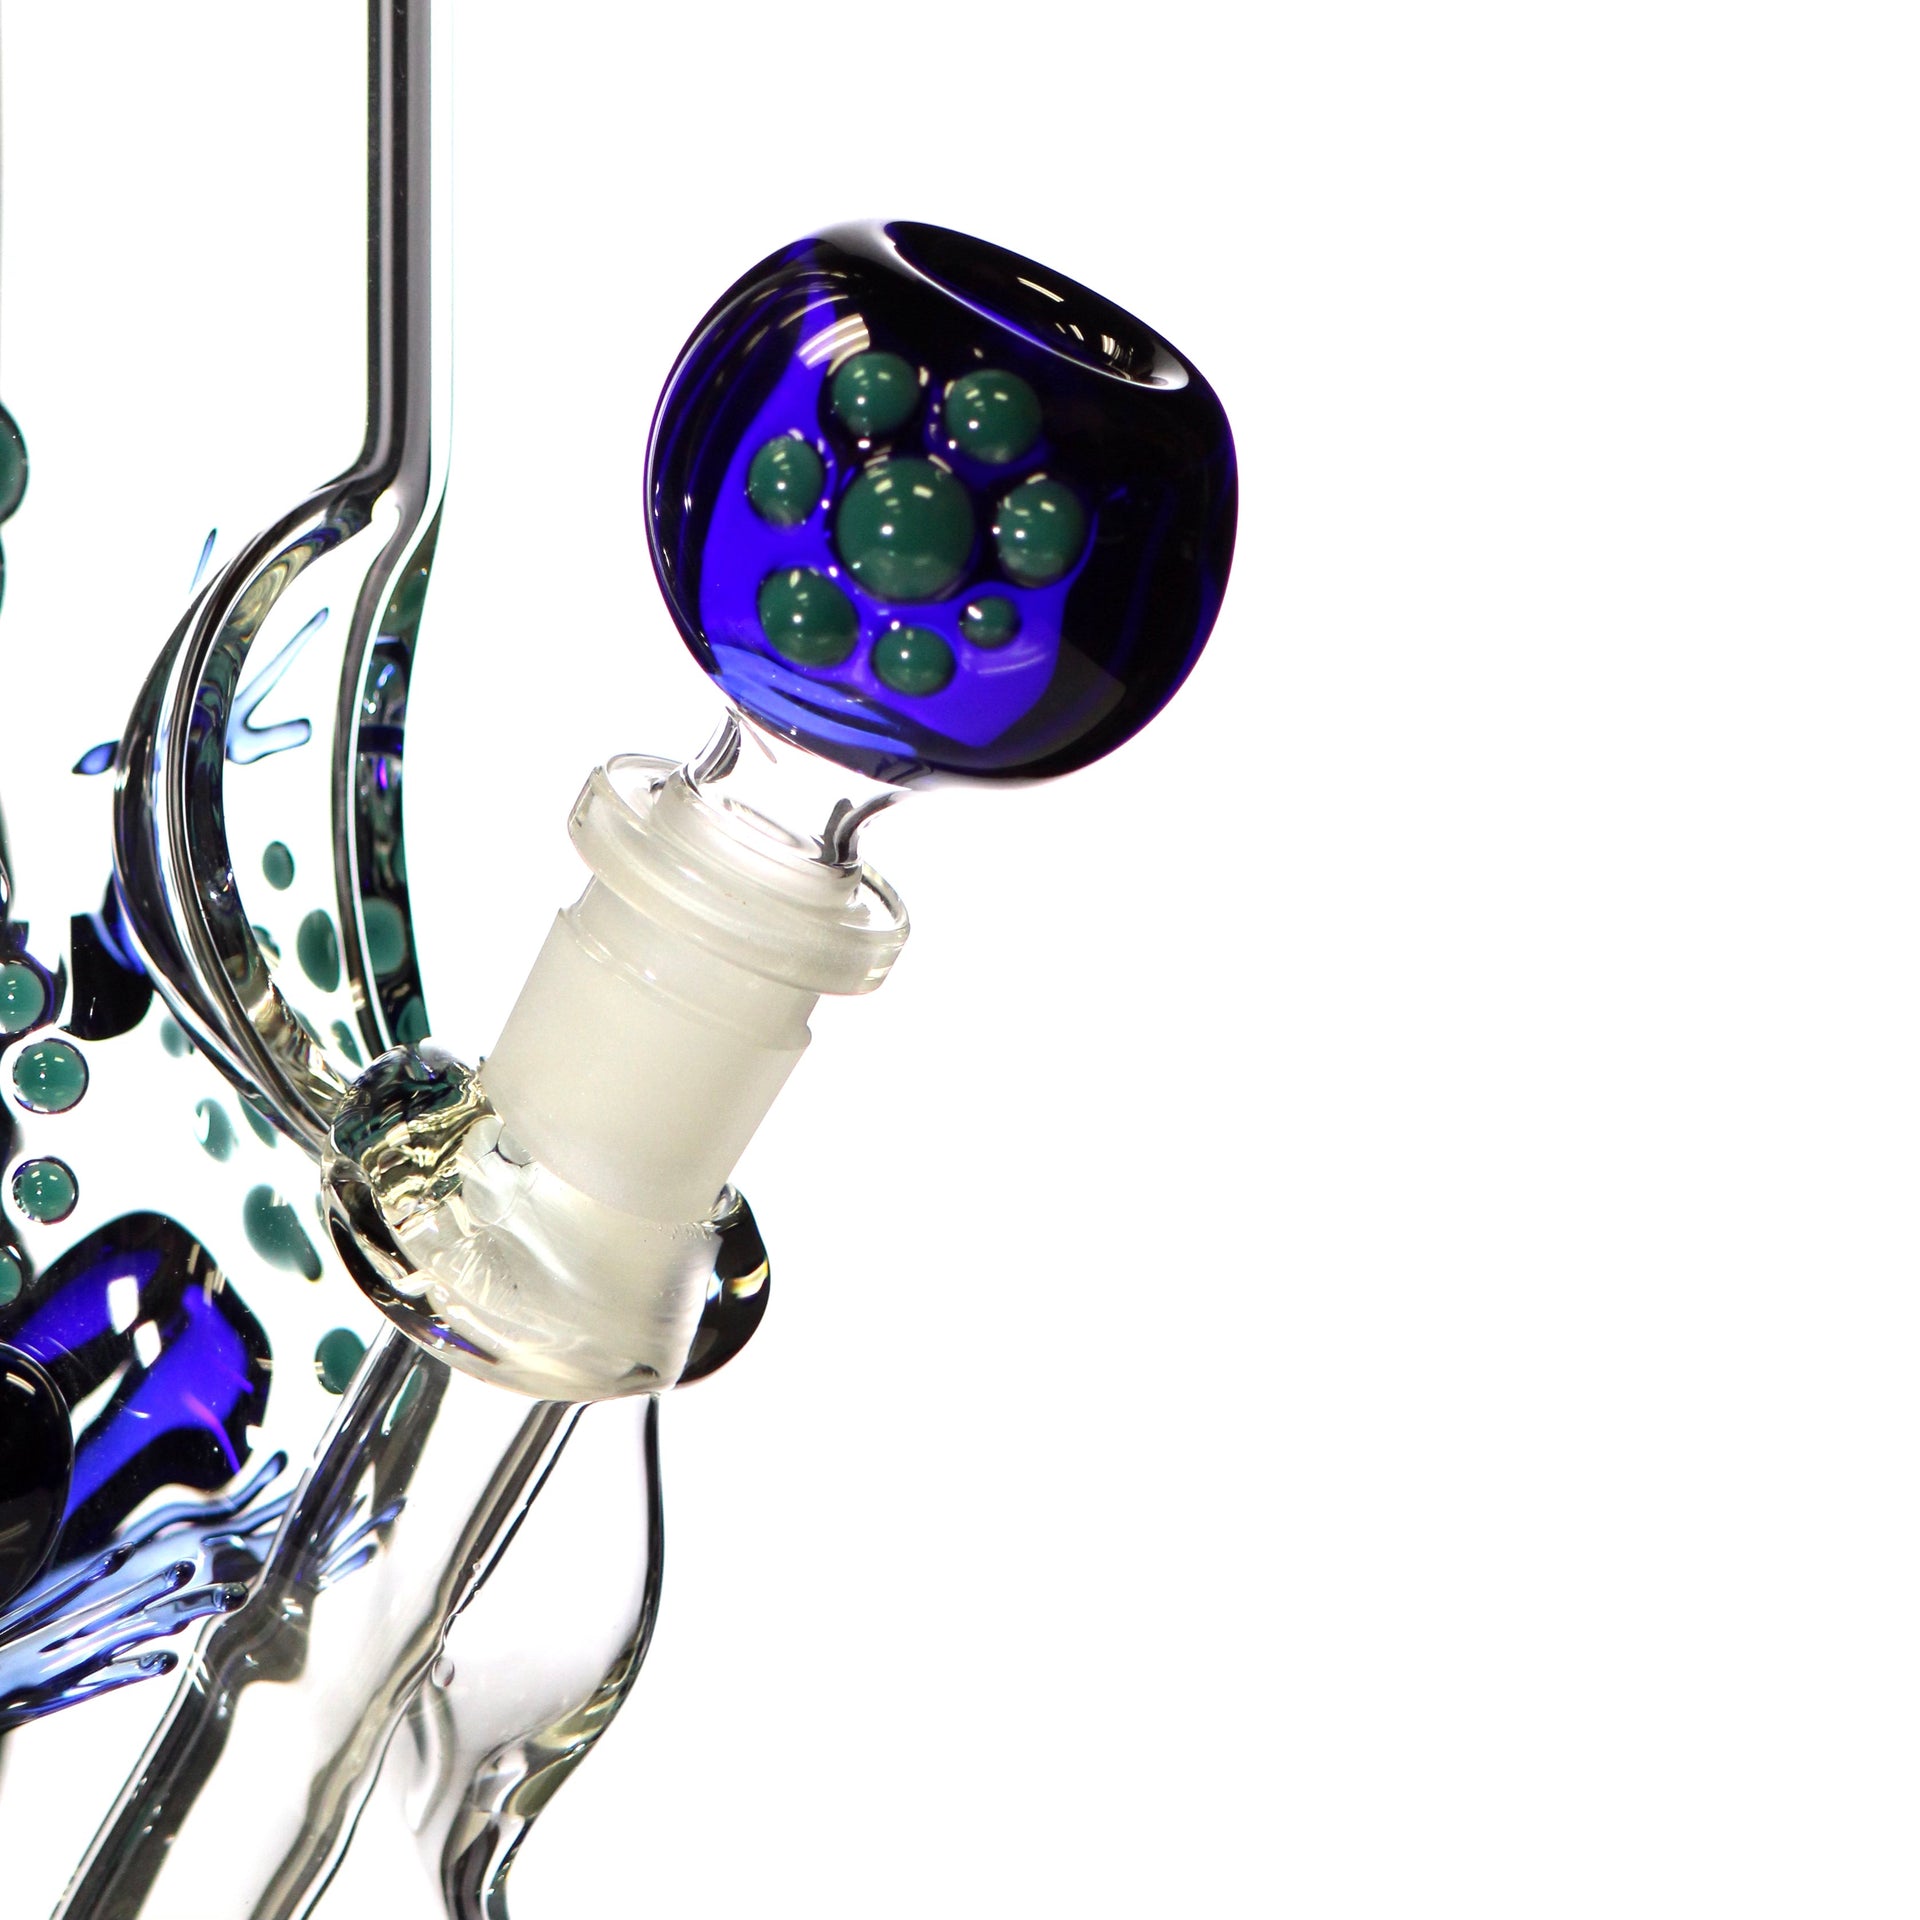 Trident Glass Bowl Piece Incuded